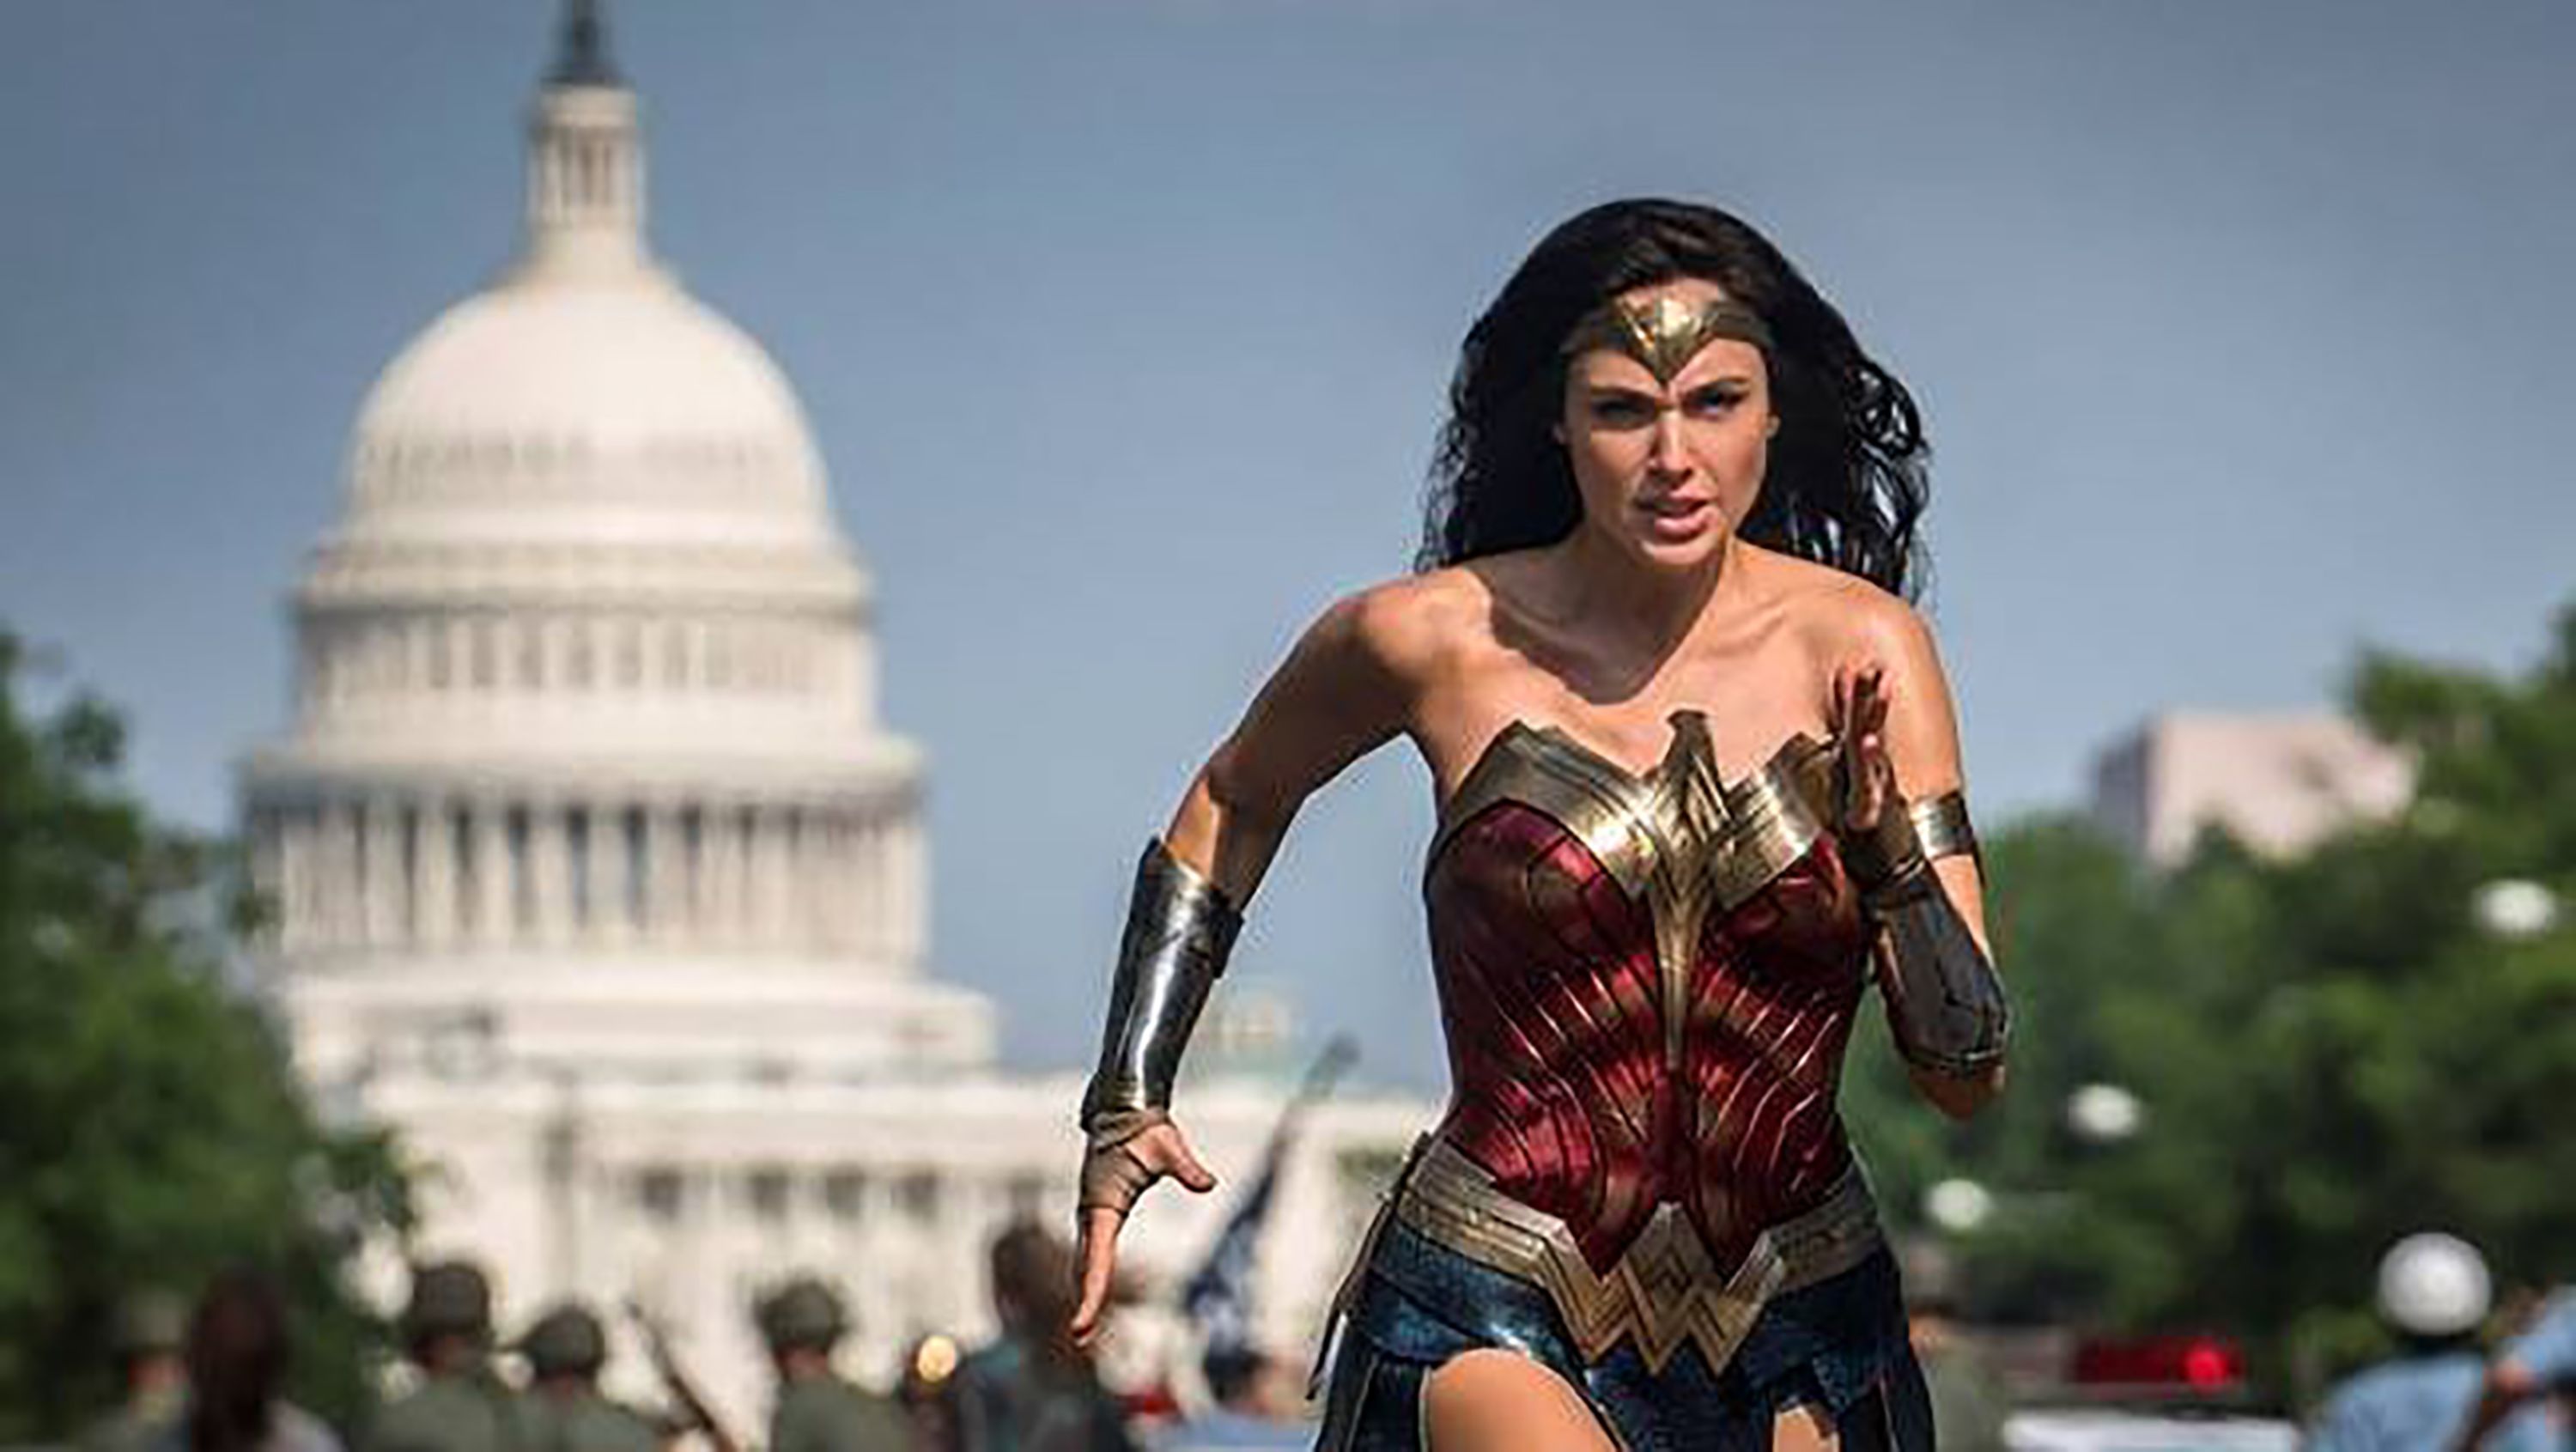 Now here's a gift!<strong> "Wonder Woman 1984,"</strong> starring Gal Gadot, arrives on <strong>HBO Max</strong> (and in theaters) on Christmas Day. The superhero finds herself facing two all-new foes: Max Lord and The Cheetah in this next chapter. It's just one of the pieces of content streaming in December. 